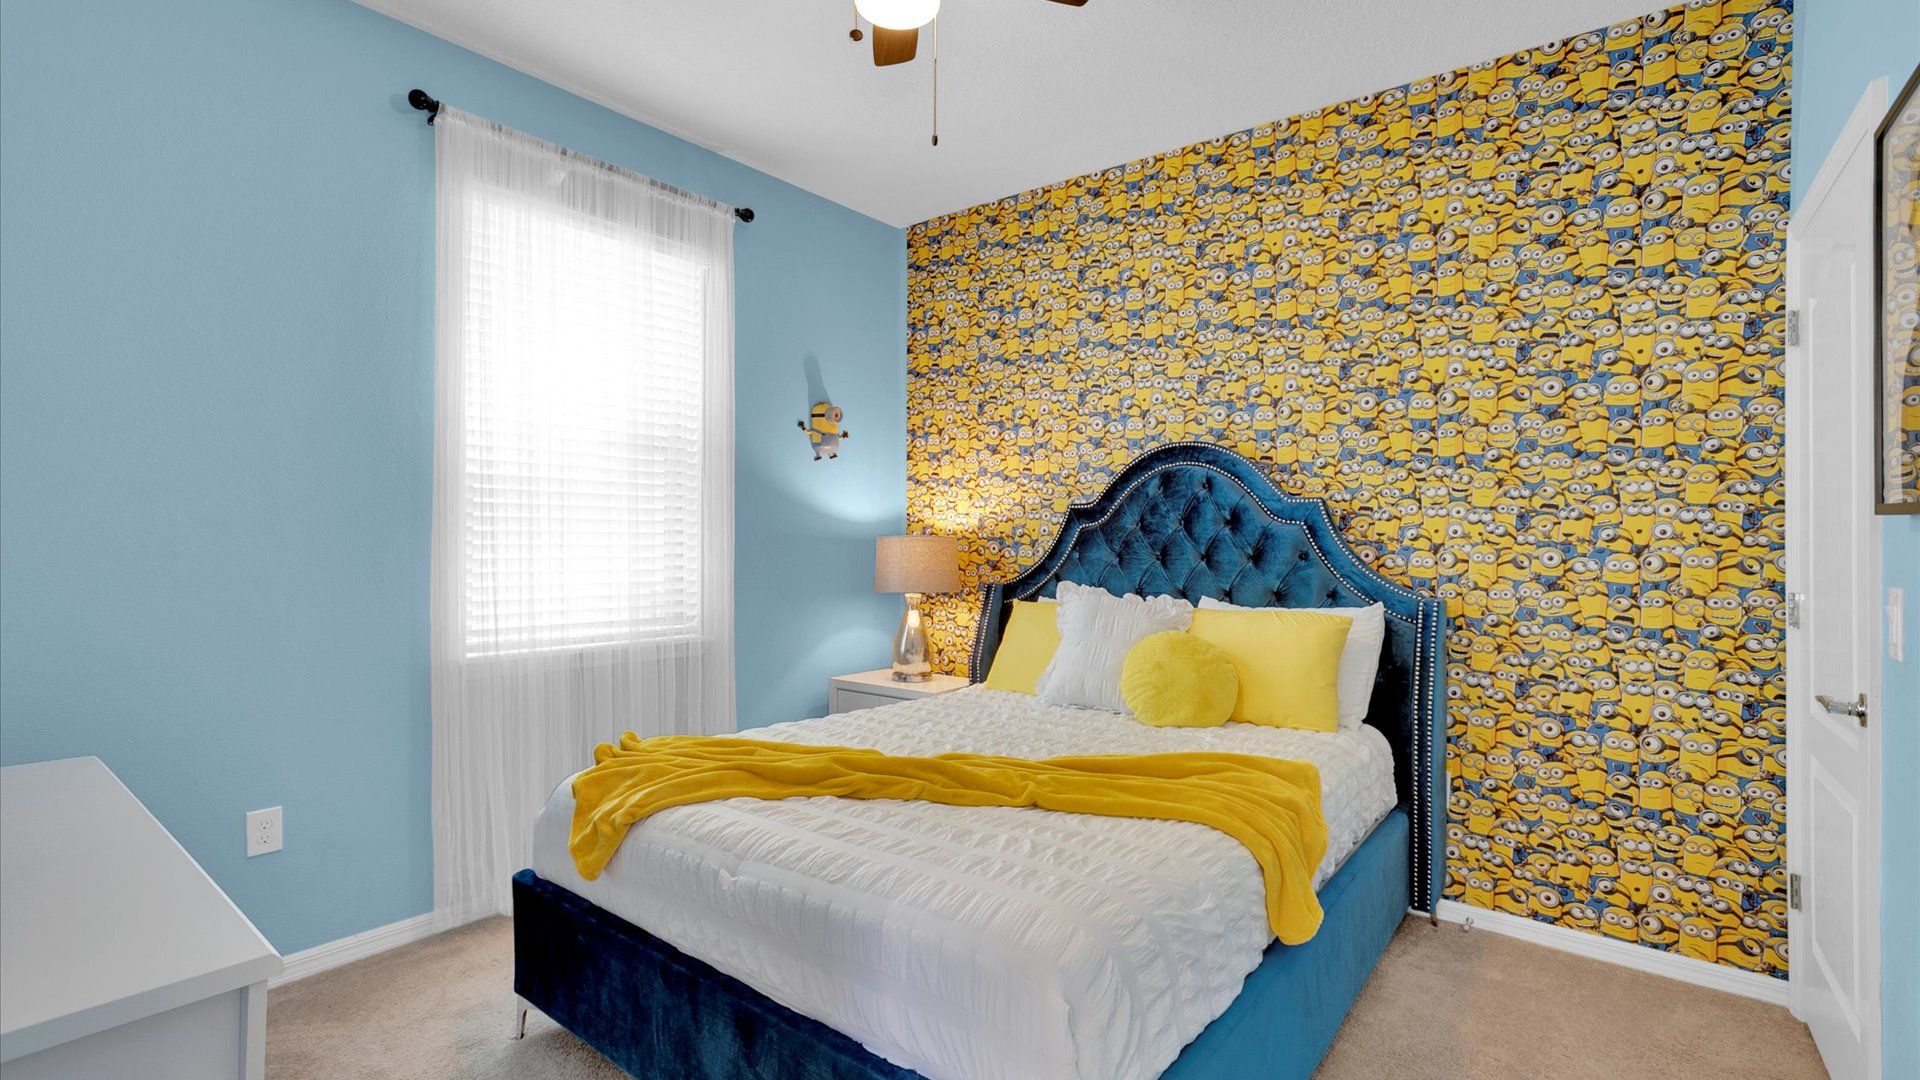 Queen Suite Bedroom 5 Downstairs
Minion Theme